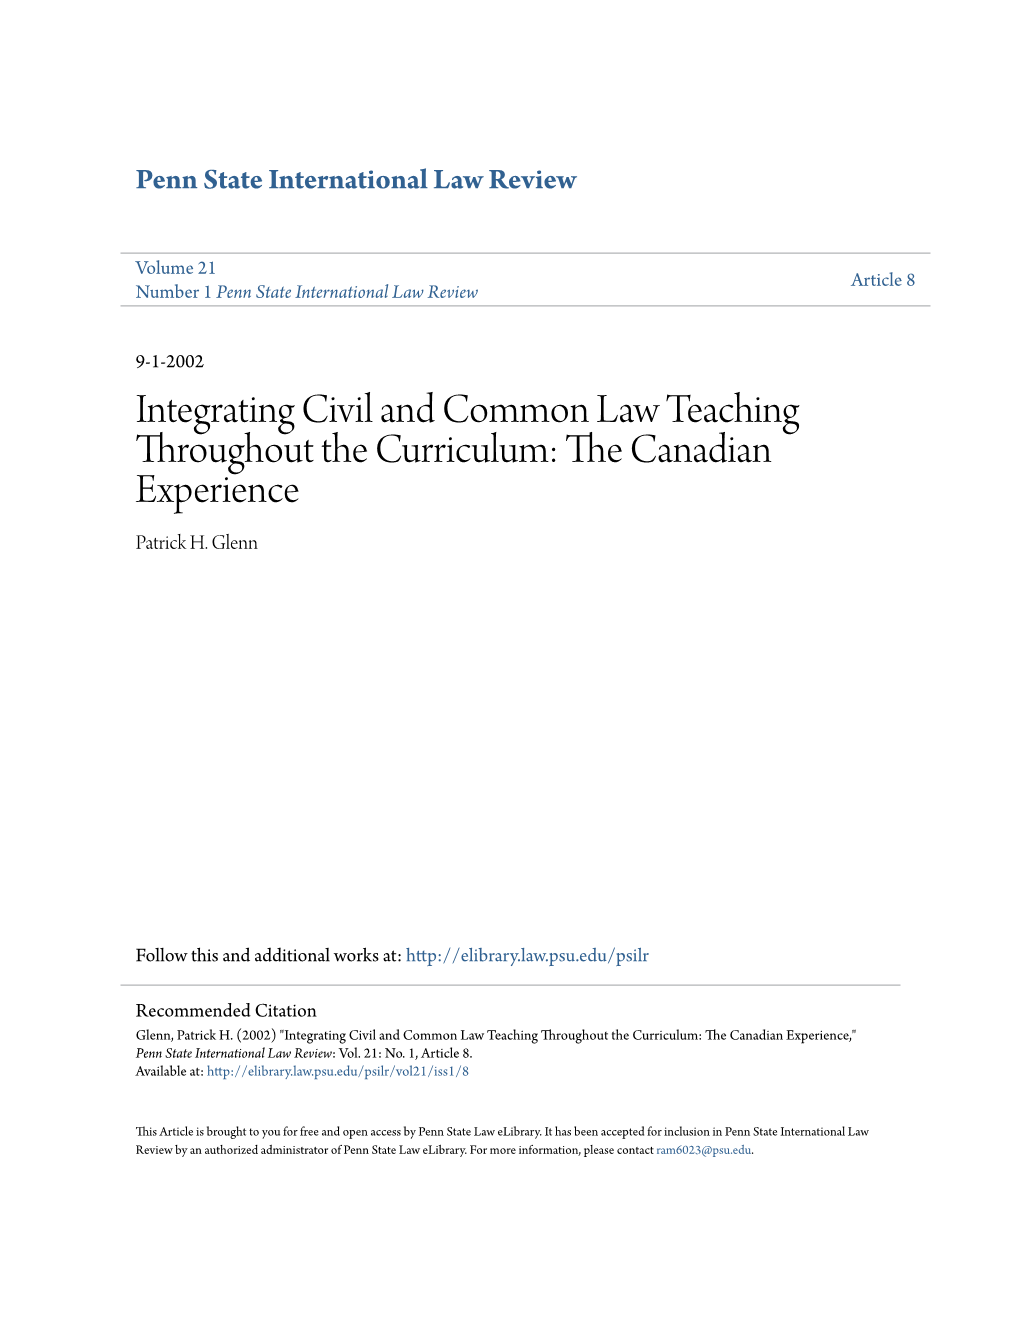 Integrating Civil and Common Law Teaching Throughout the Curriculum: the Ac Nadian Experience Patrick H